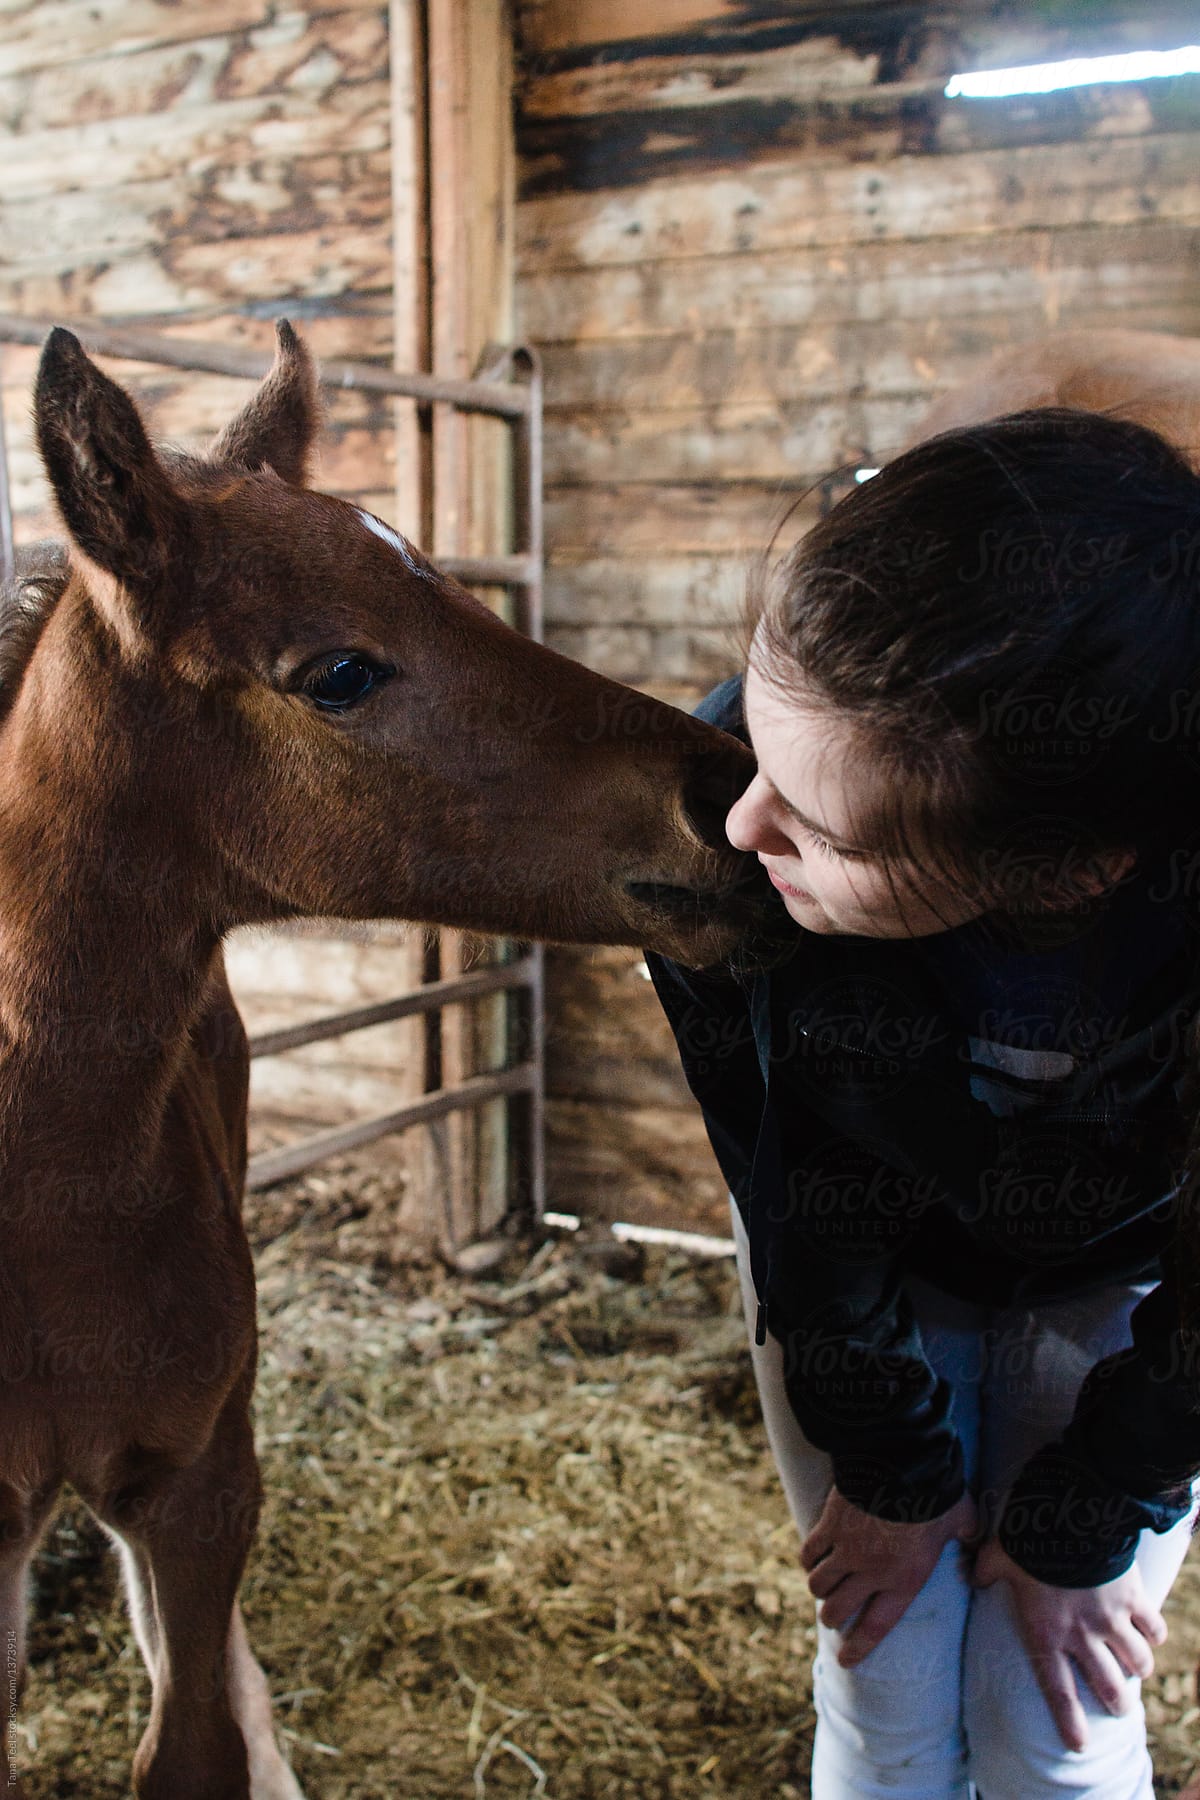 Teen Plays With Newborn Filly In Barn By Tana Teel Stocksy United